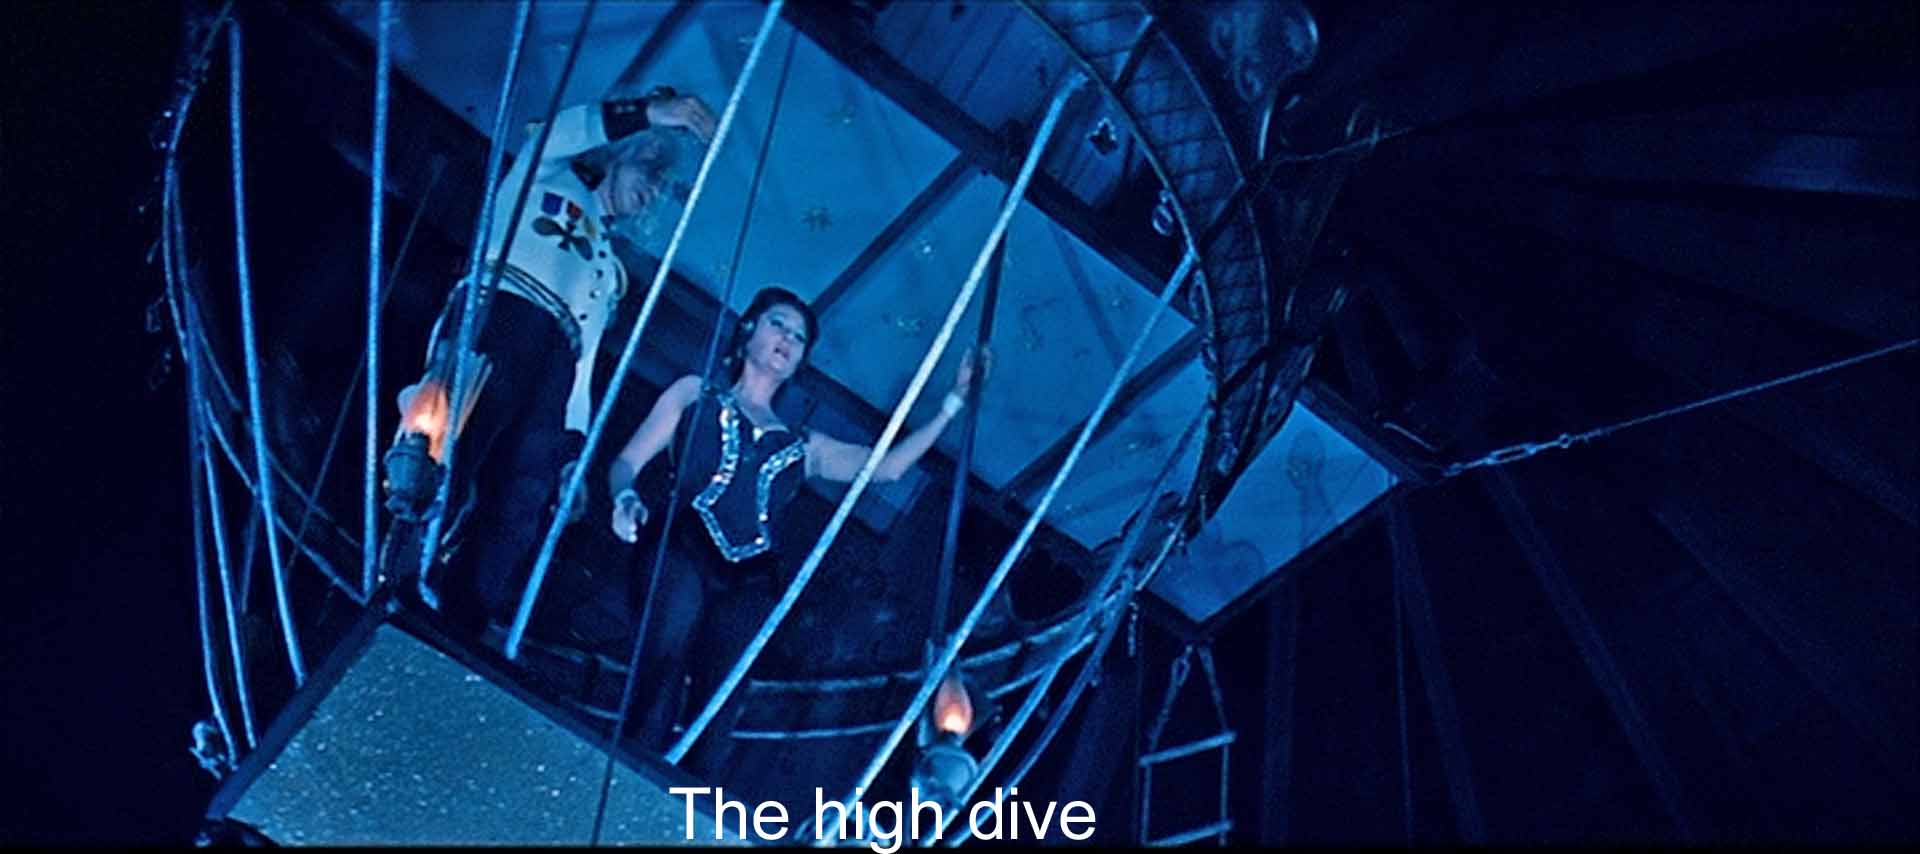 The high dive